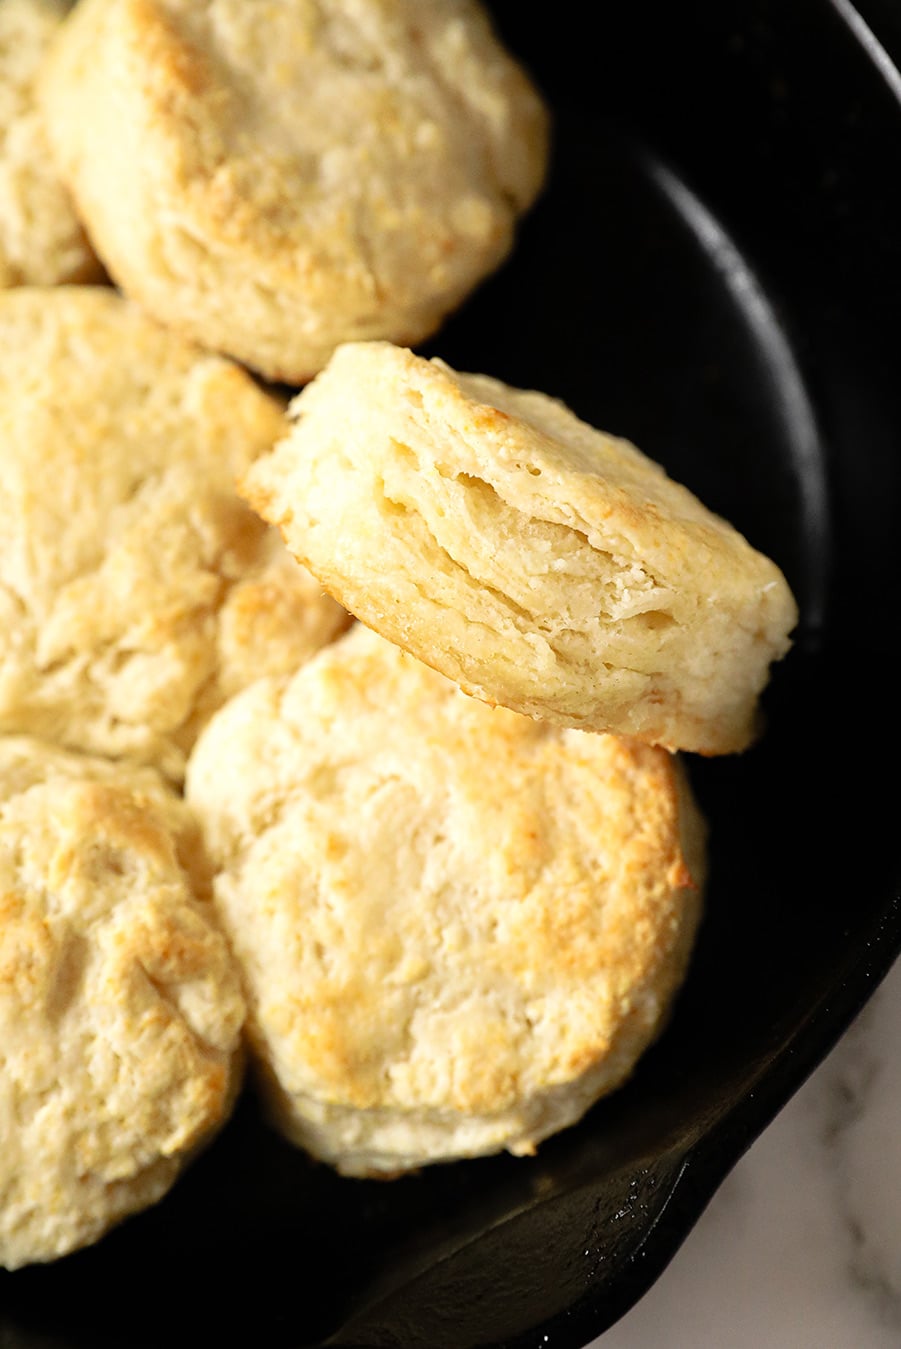 baked biscuits in a cast iron skillet and one biscuit up close.